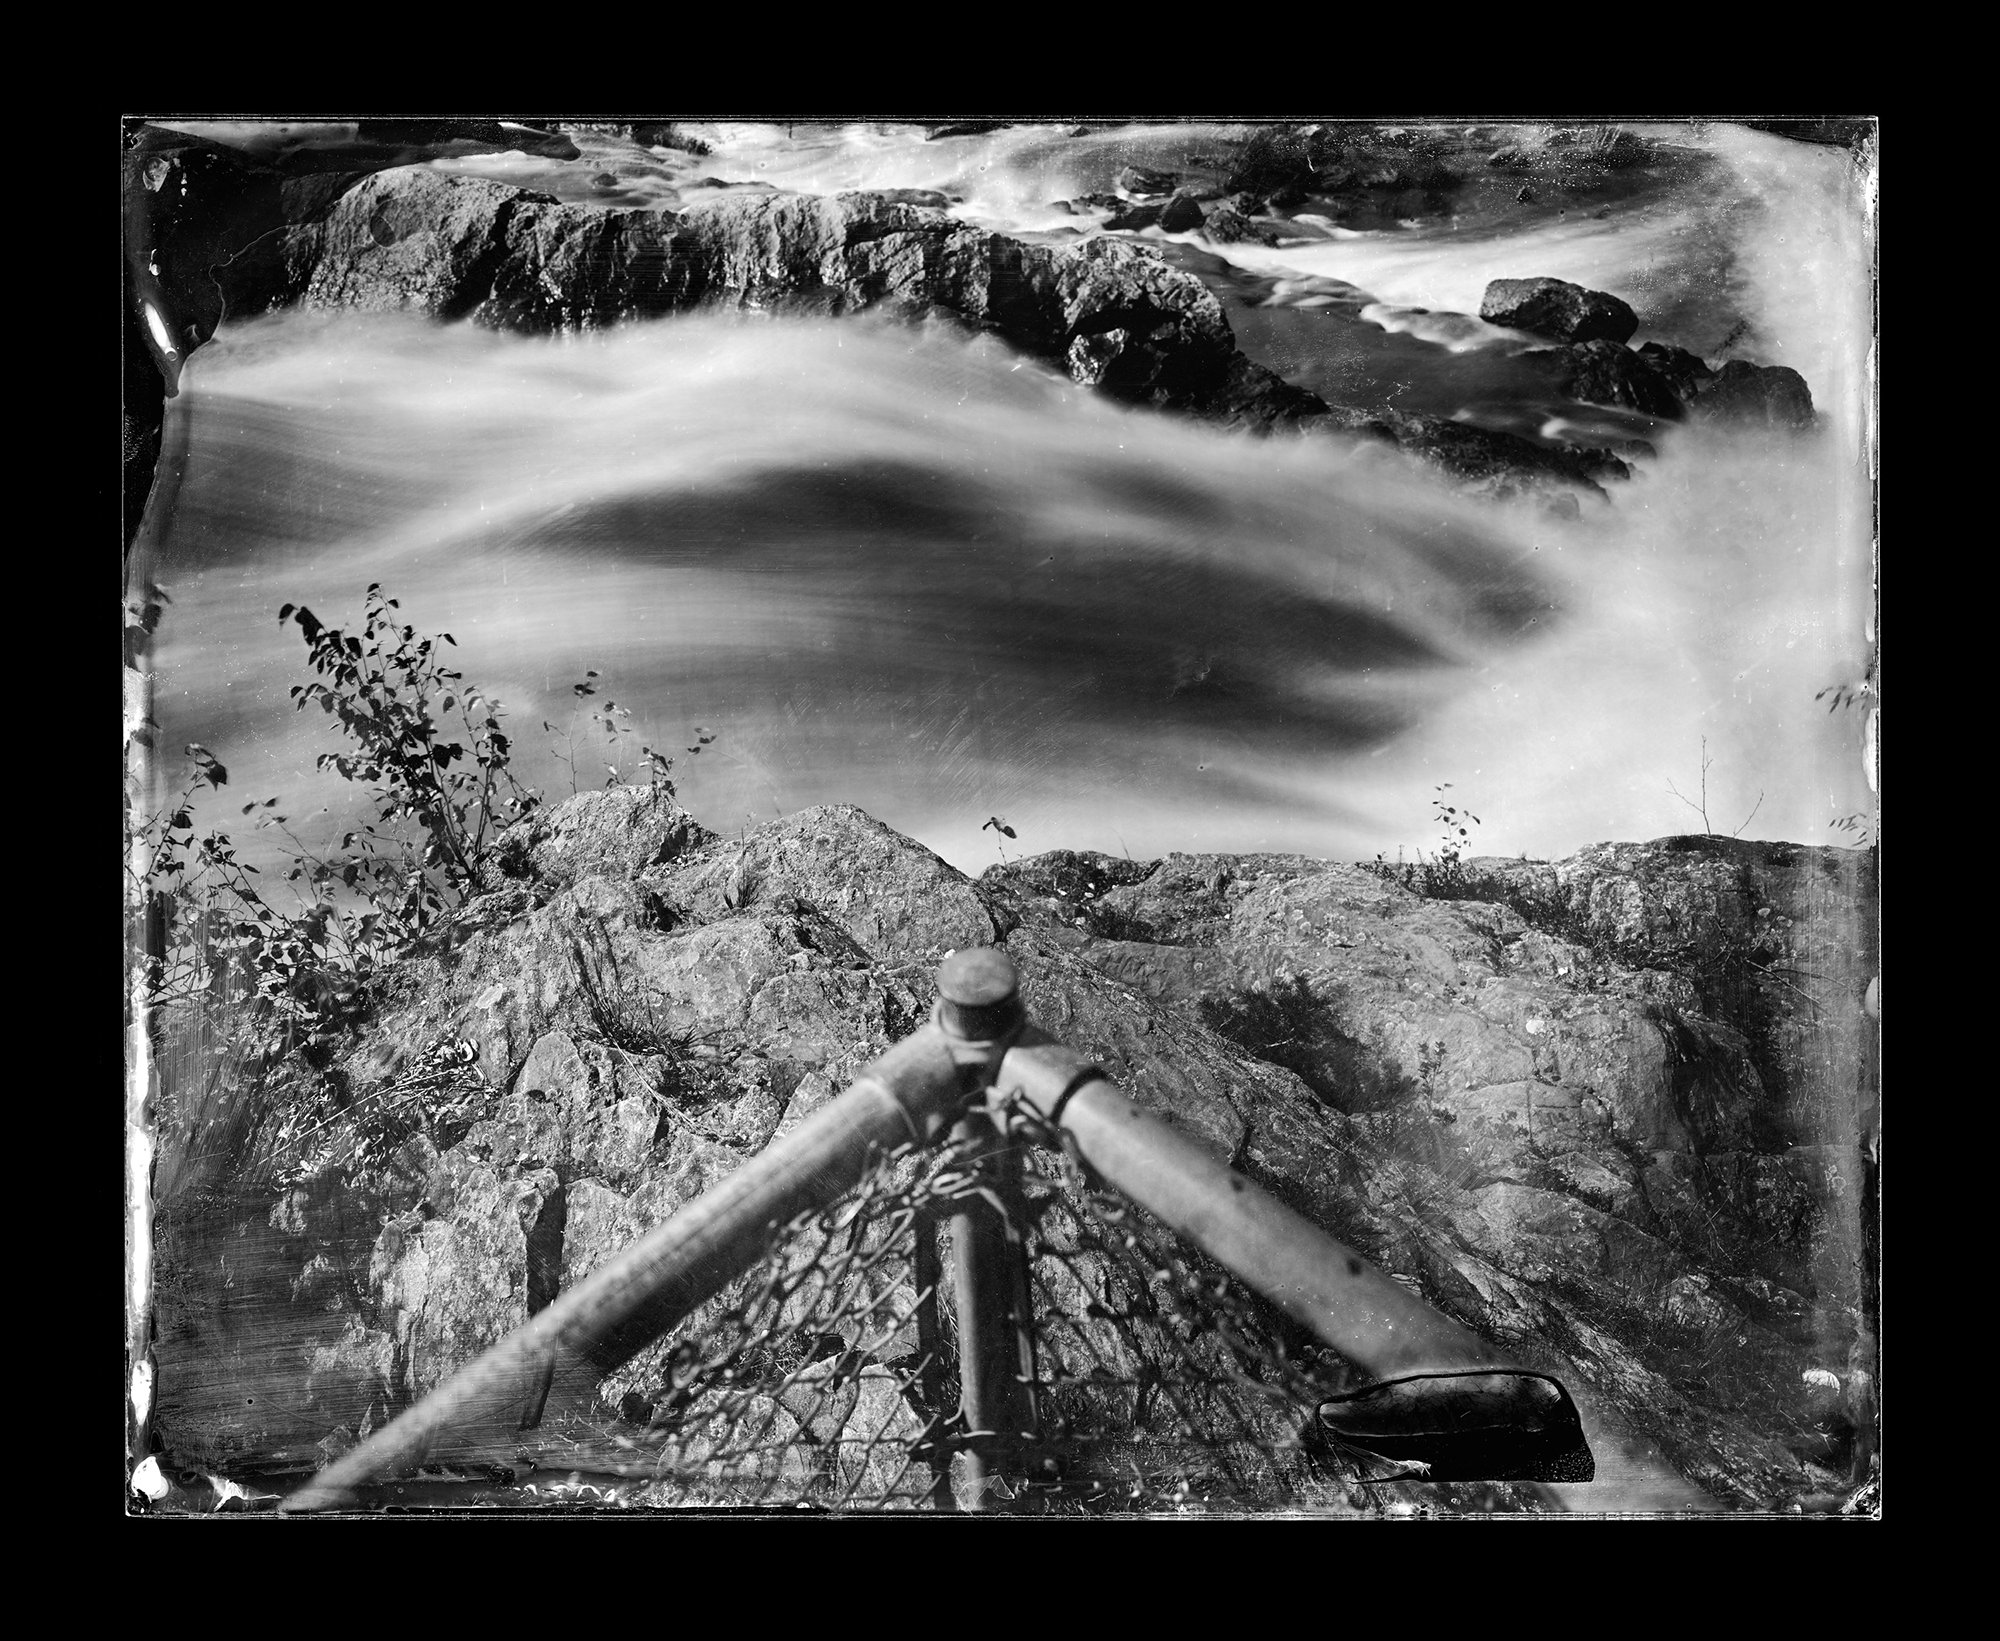   Michael Kolster,  Great Falls,  Auburn, Maine, Androscoggin River , 2011, Ambrotype mounted to black acrylic, 8 x 10 inches,     $4000   